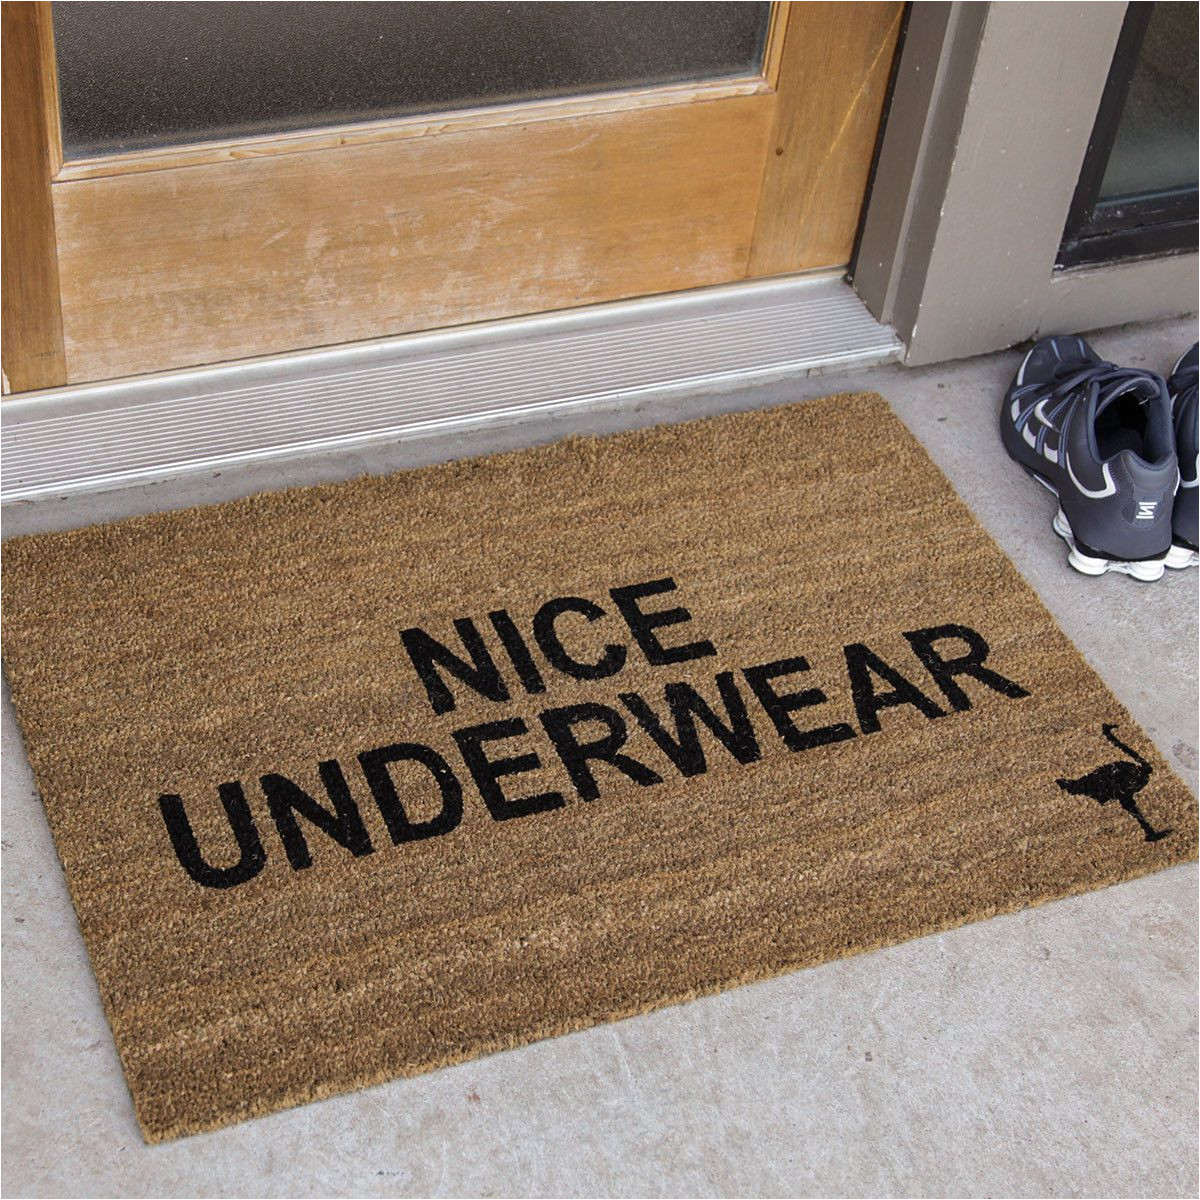 Well Hello there Doormat Our New Collection Of Funny Whimsical Doormats are Just What Your